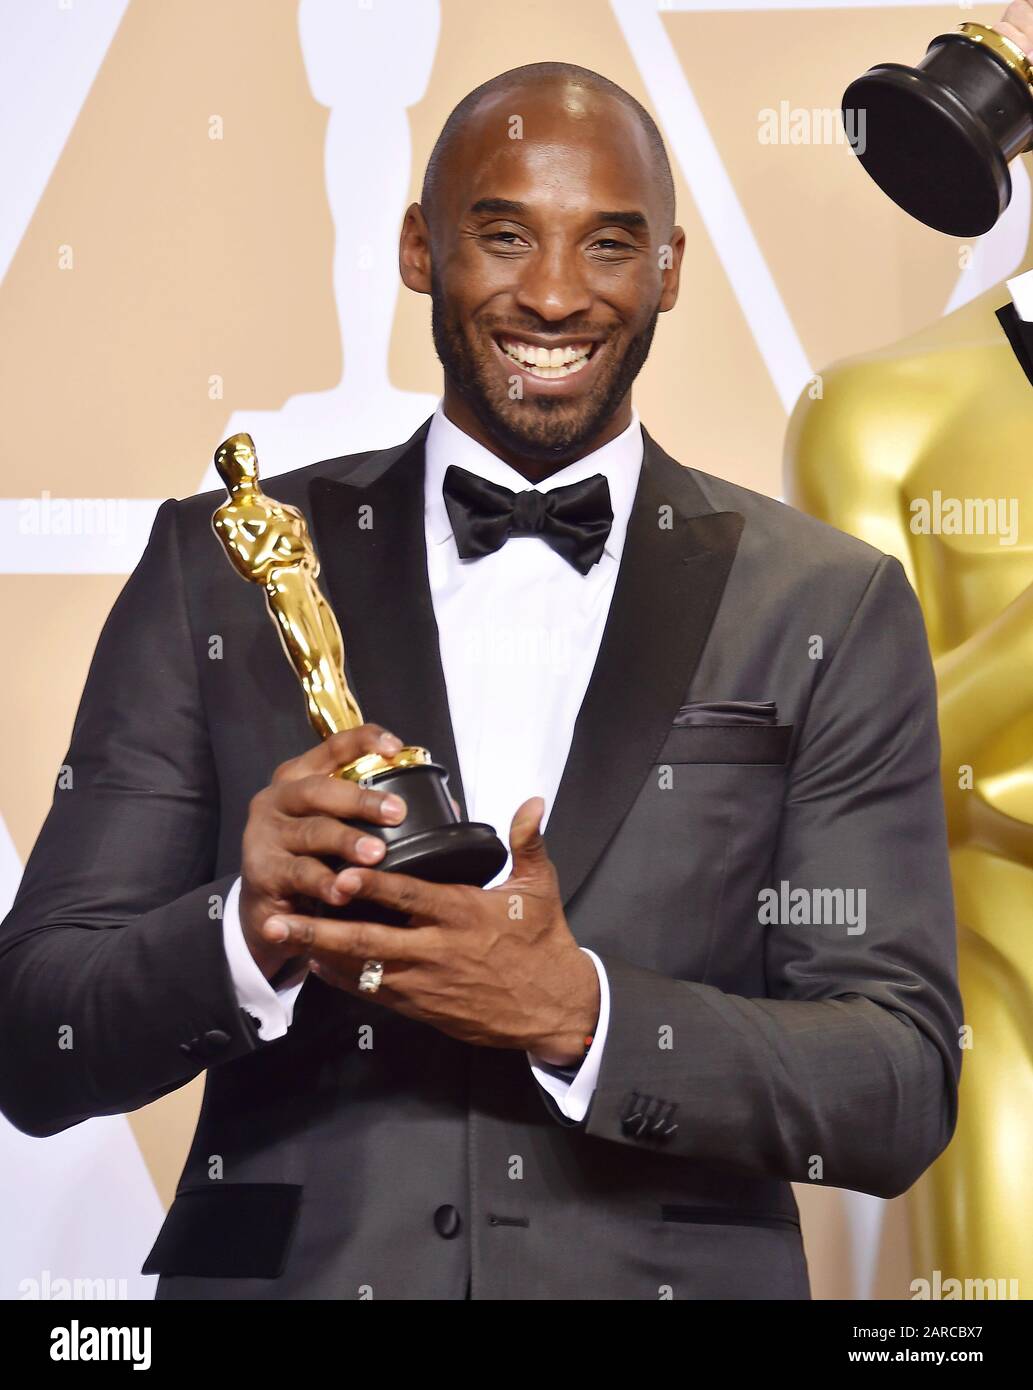 HOLLYWOOD, CA - MARCH 04: Filmmaker Kobe Bryant poses in the press room during the 90th Annual Academy Awards at Hollywood & Highland Center on March 4, 2018 in Hollywood, California. Stock Photo